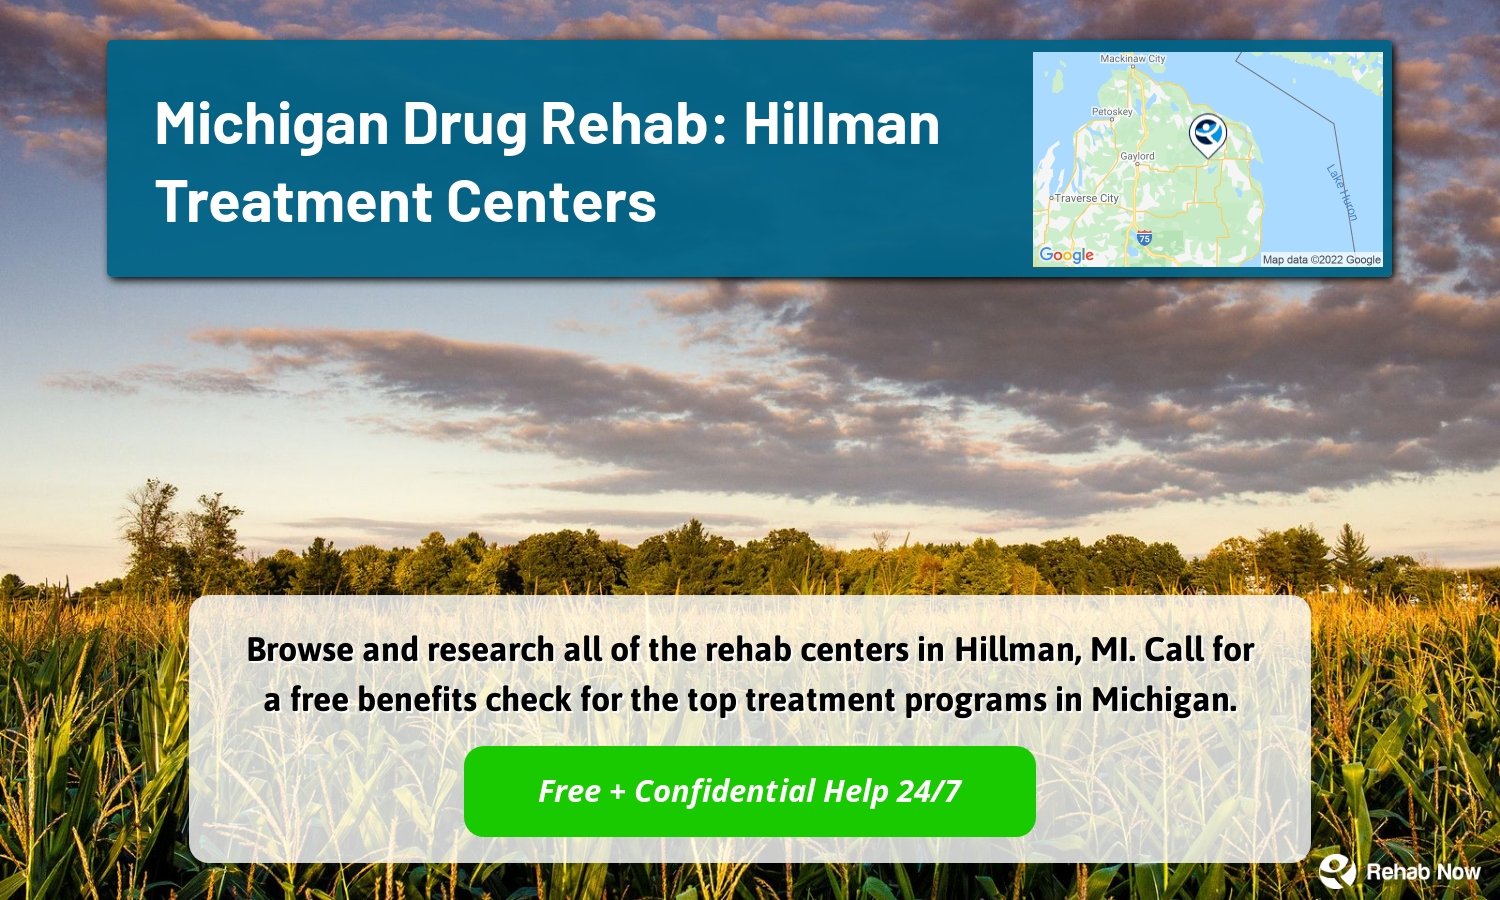 Browse and research all of the rehab centers in Hillman, MI. Call for a free benefits check for the top treatment programs in Michigan.